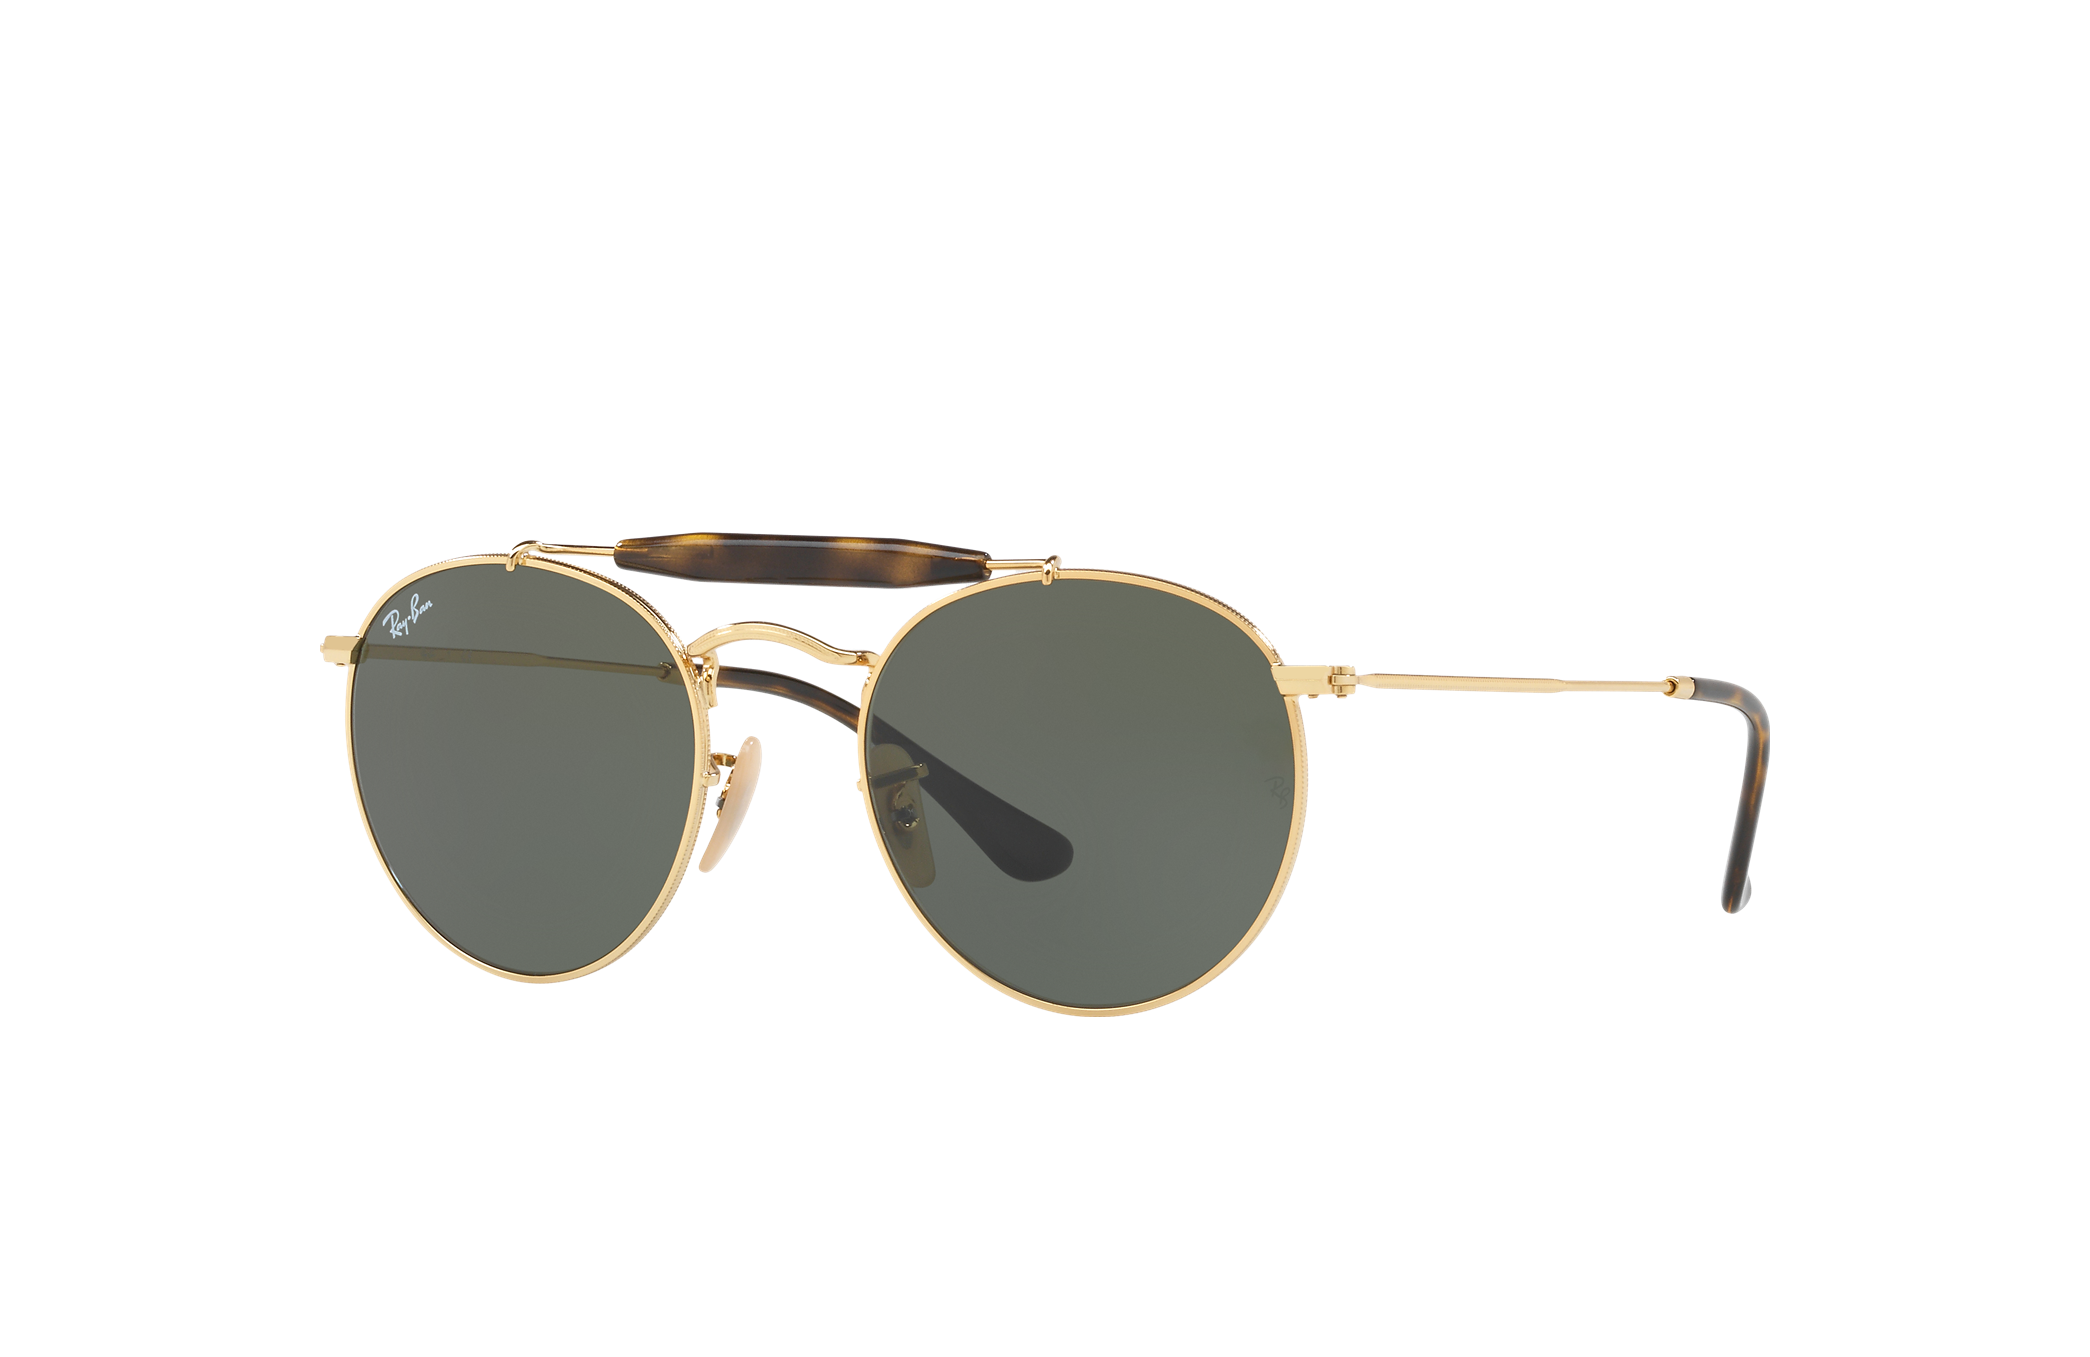 Rb3747 Sunglasses in Gold and Green - RB3747 | Ray-Ban®